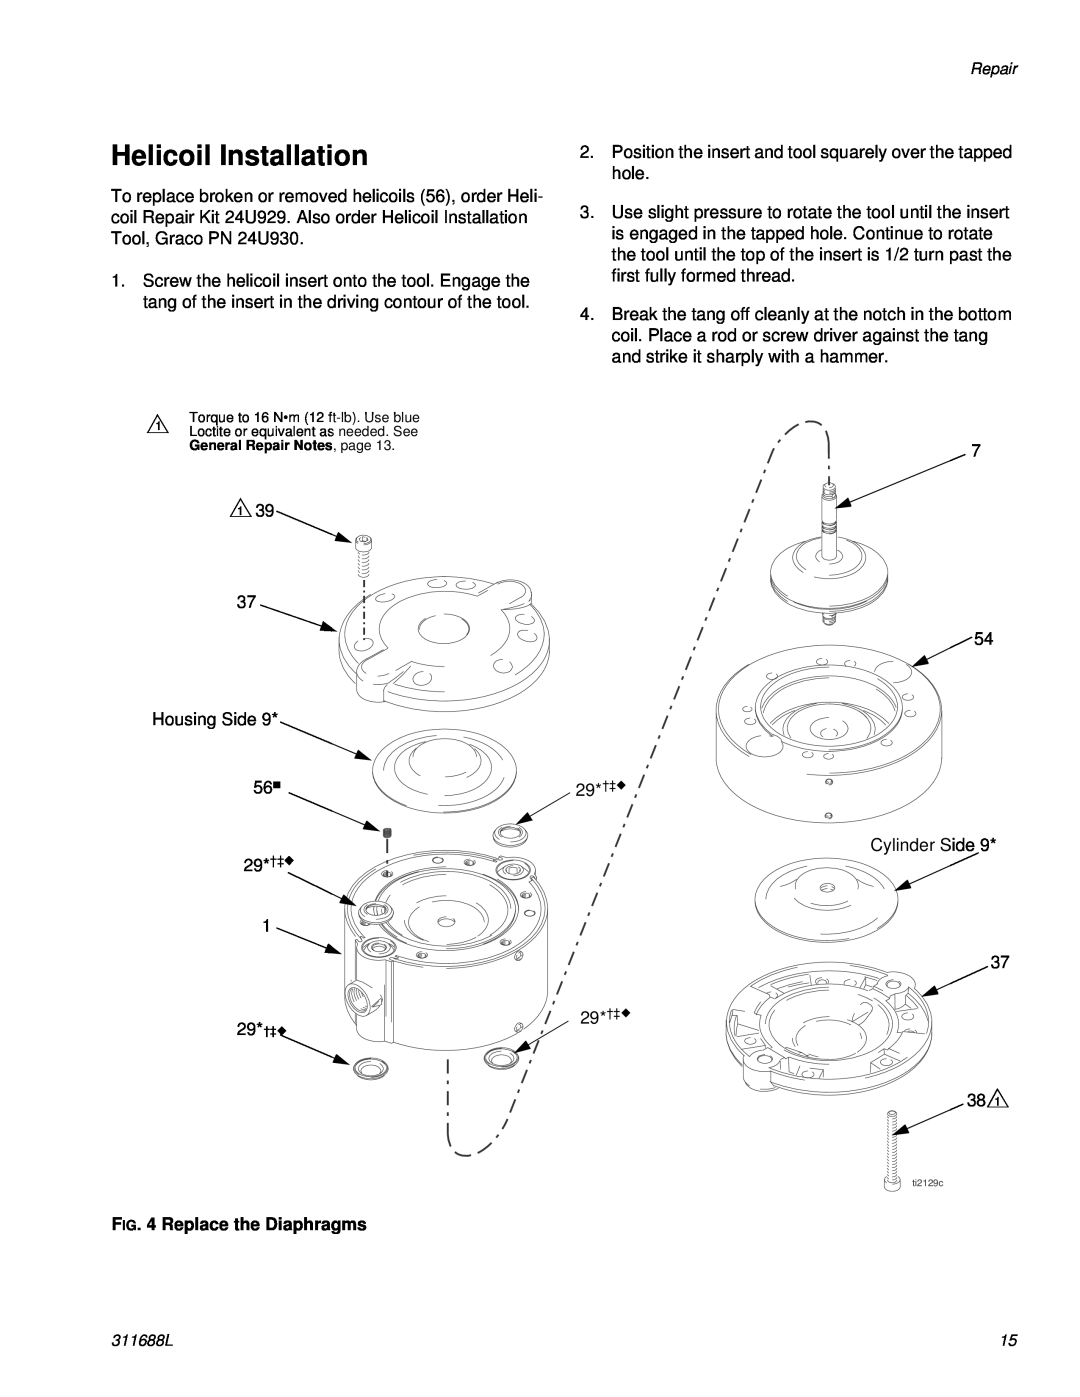 Graco 311688L important safety instructions Helicoil Installation, Replace the Diaphragms 